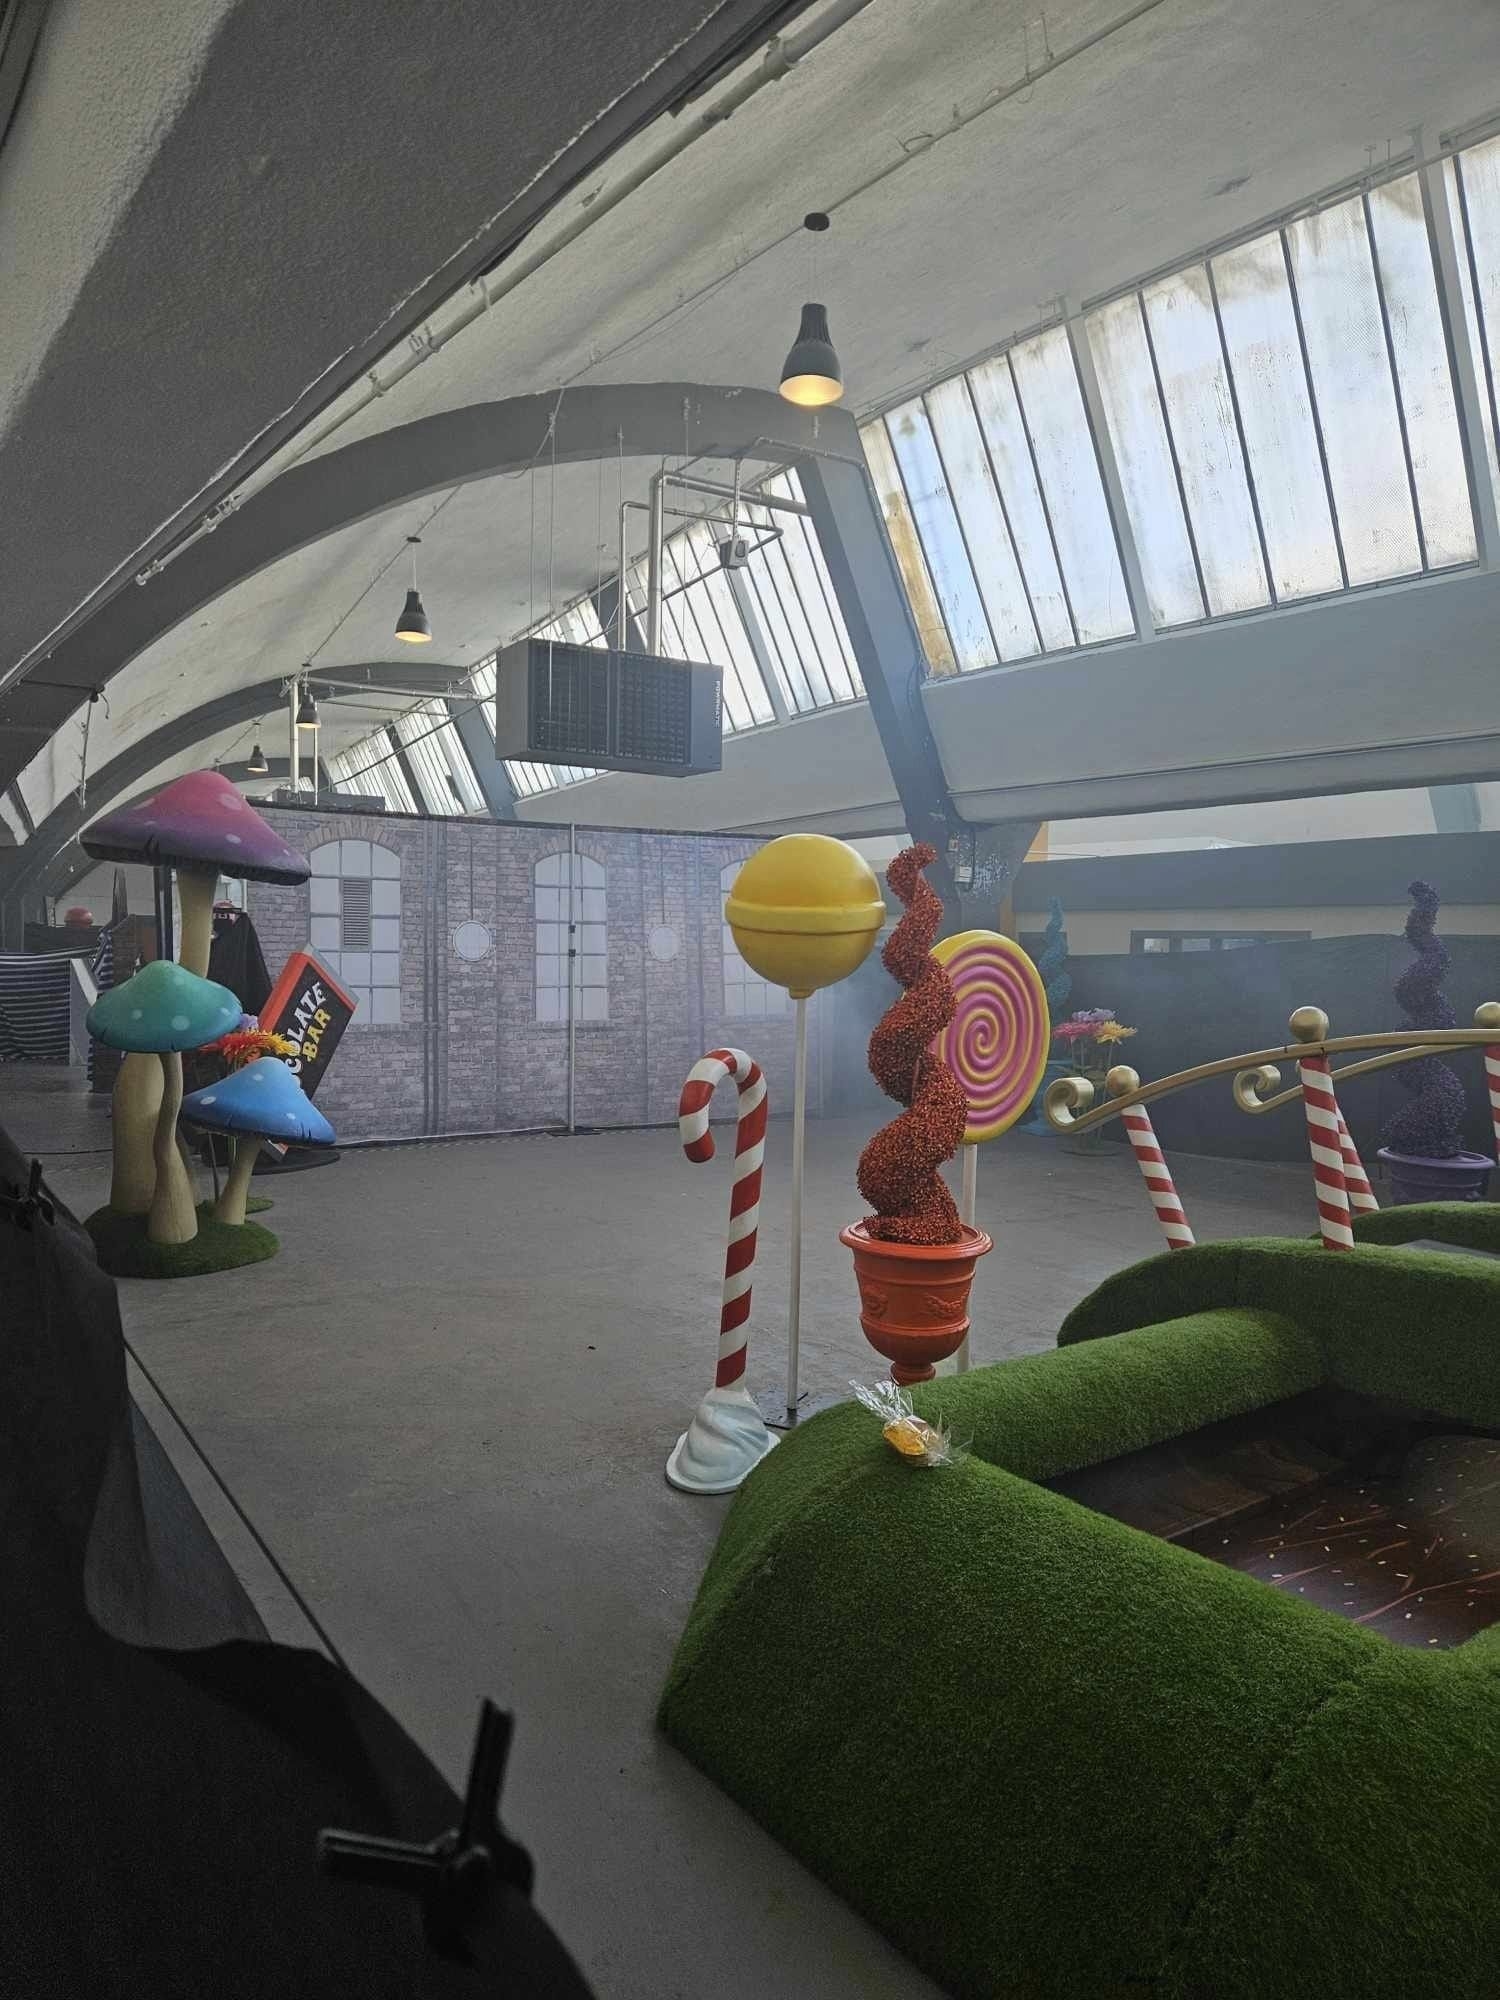 Indoor candy-themed area with oversize candy decorations and artificial turf and a fake brick wall that you can see over